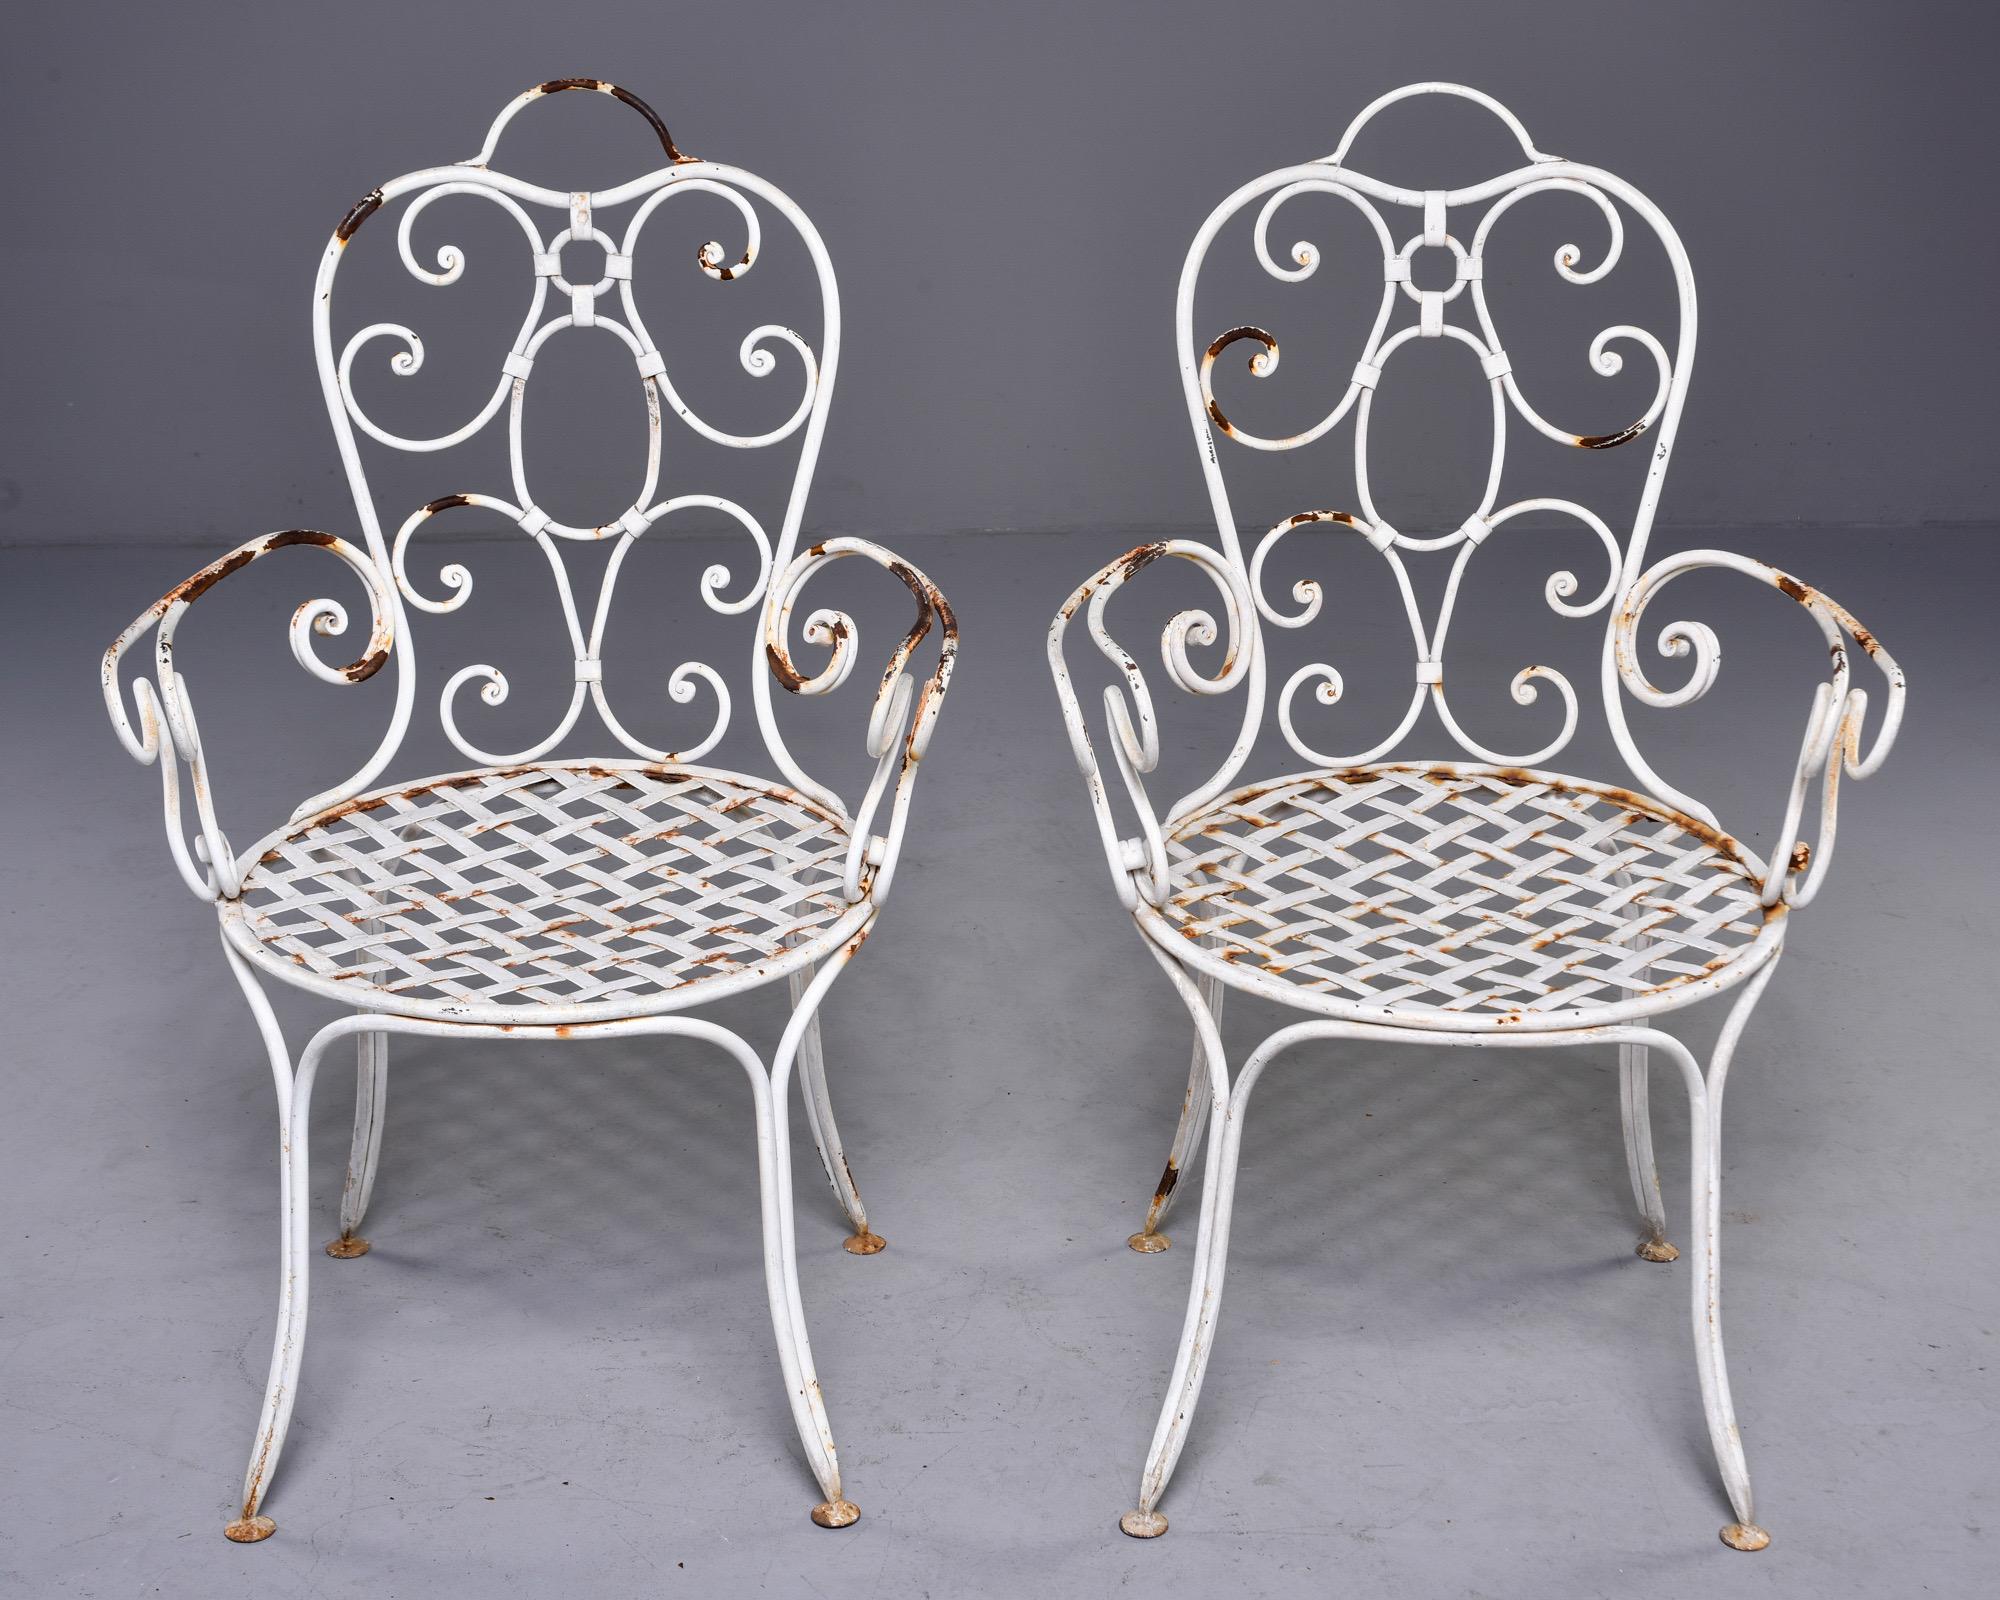 Early 20th C French White Iron Five Piece Garden Set 4